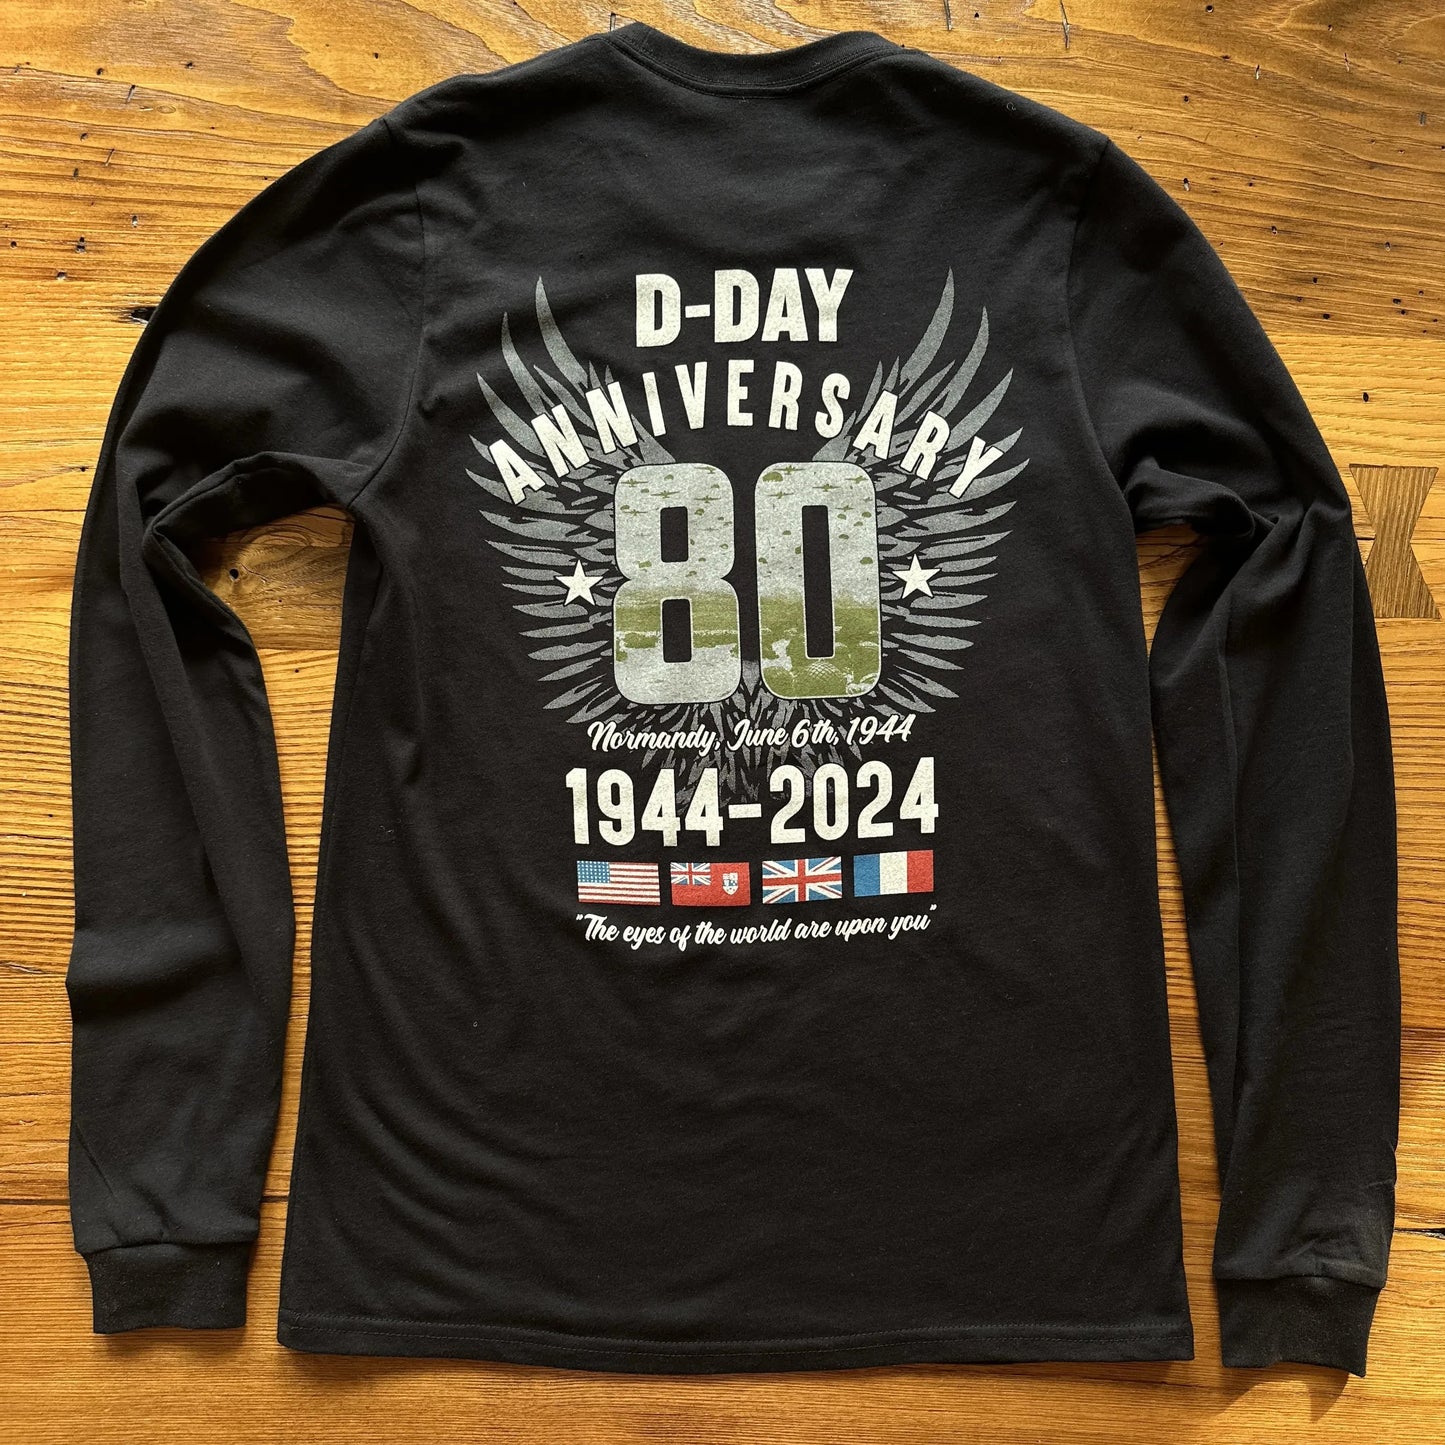 D-Day 80th Anniversary Made in America Long-sleeved shirt